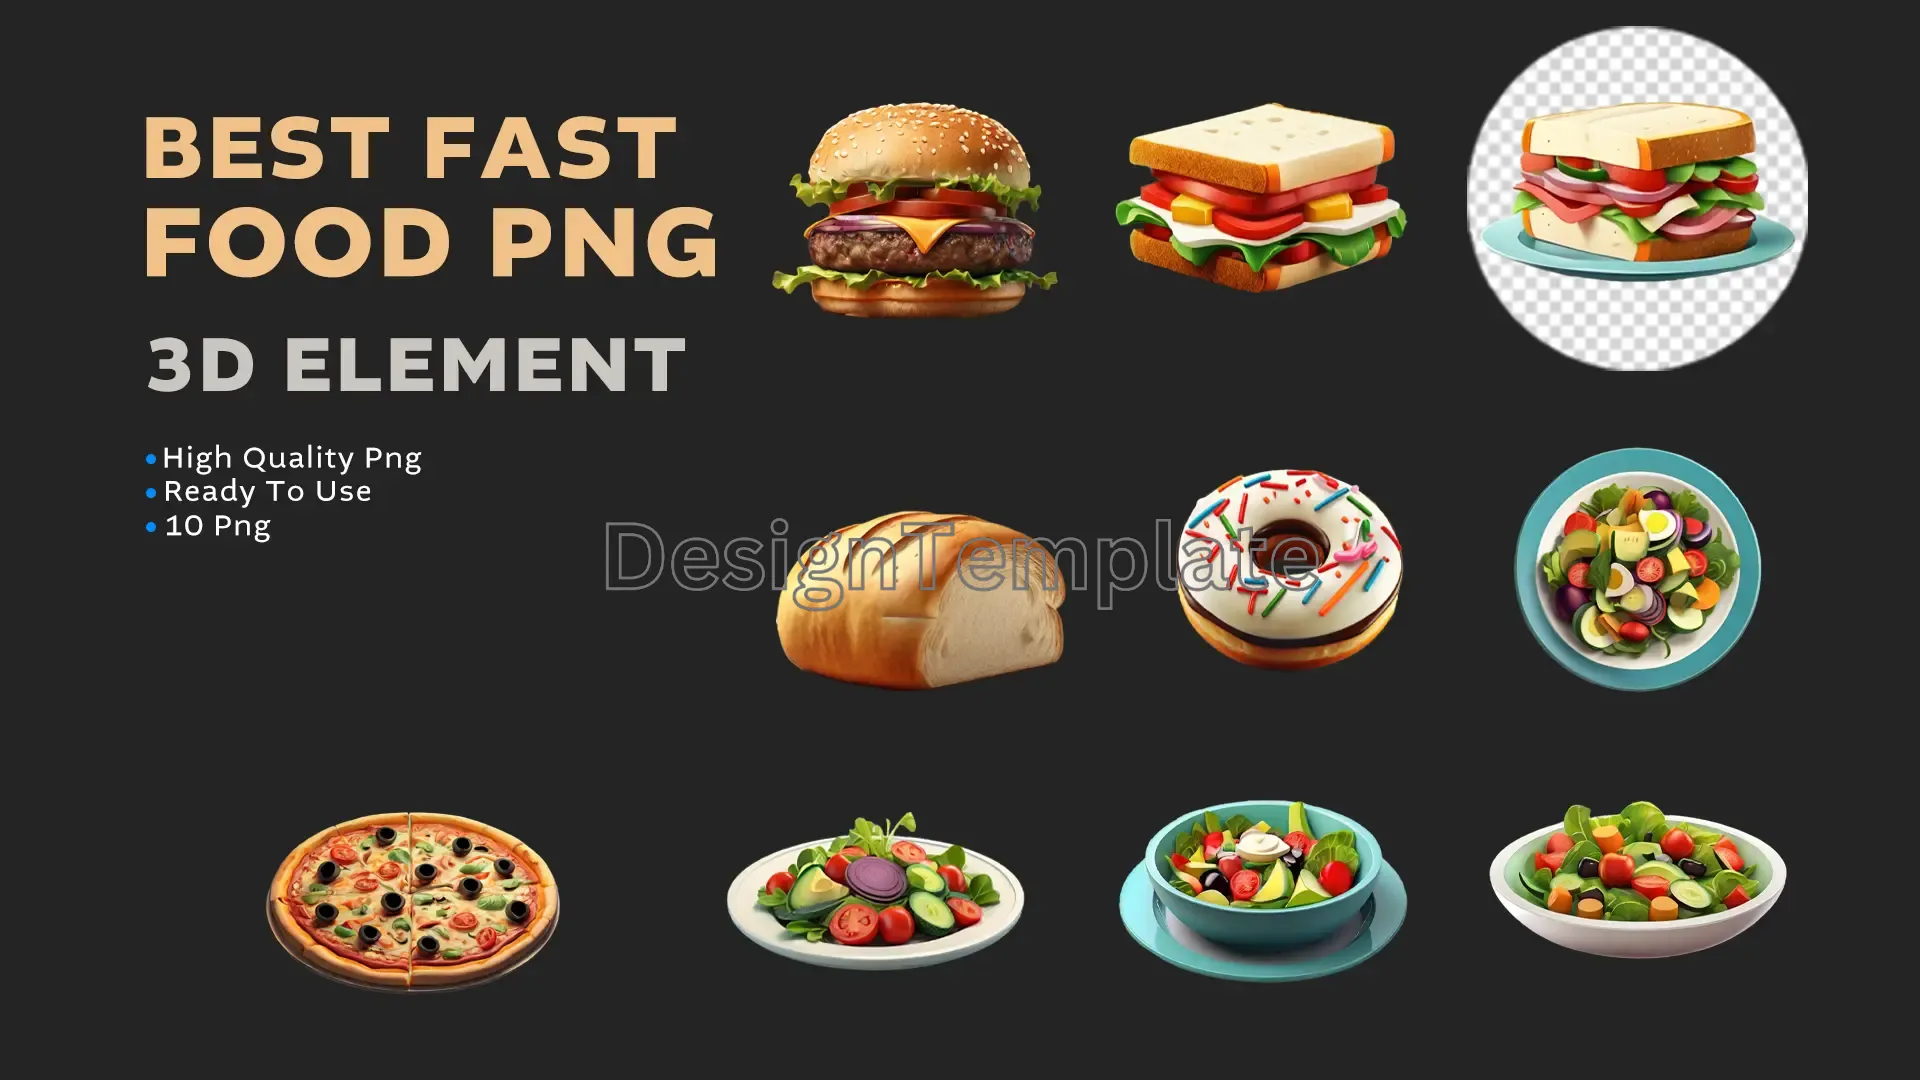 Gourmet Express Exquisite Second 3D Fast Food Icons Set image